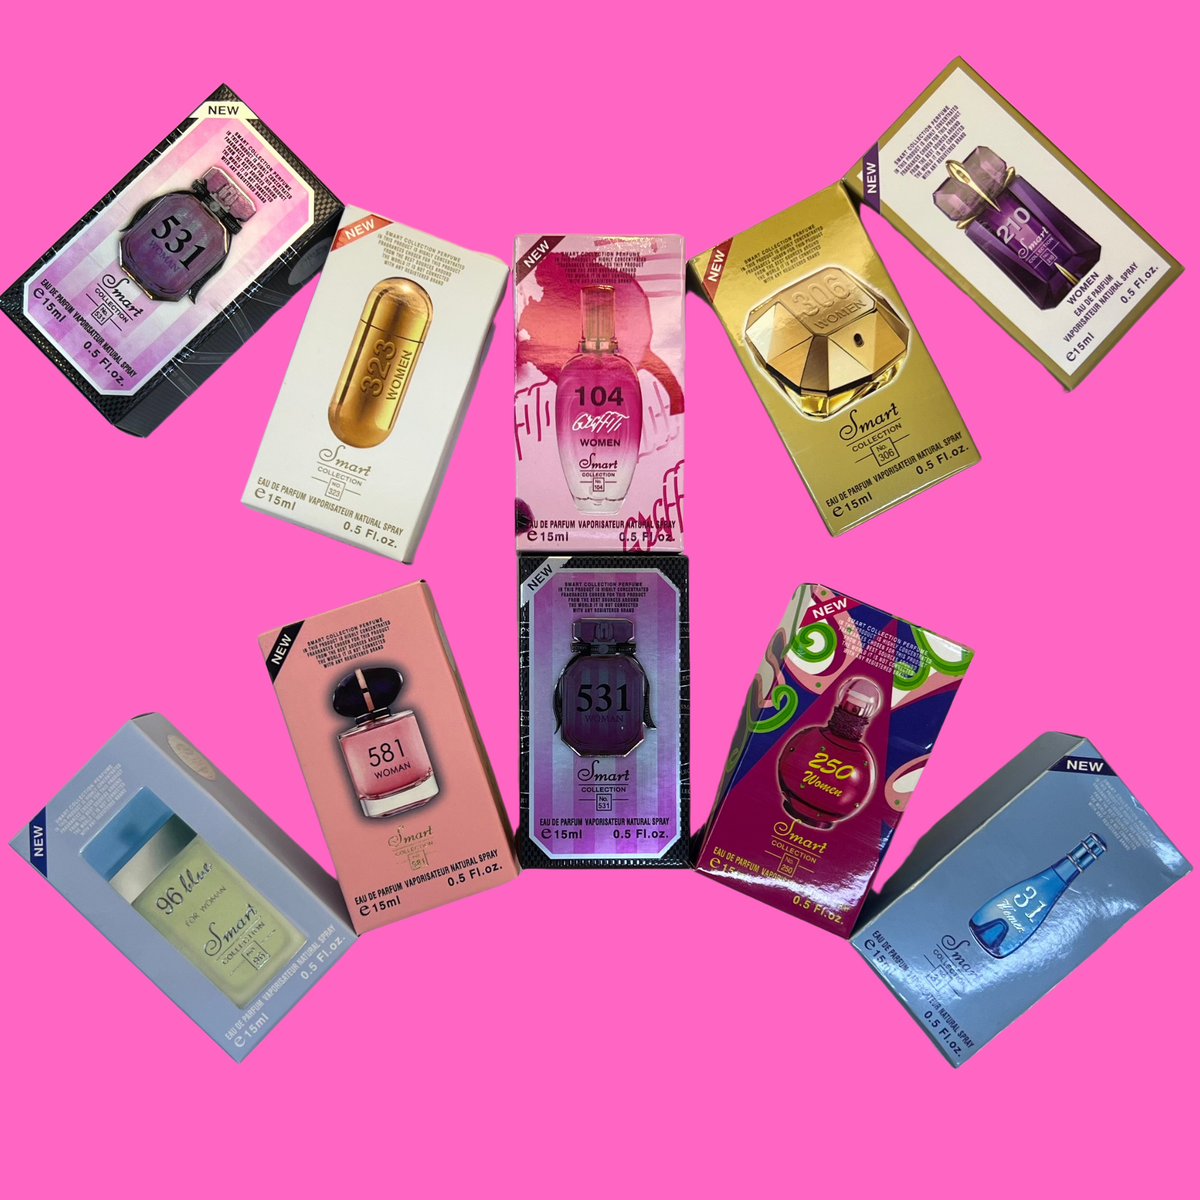 10pieces 15ML Special Combo Offer Perfume Bottles Sets For Women